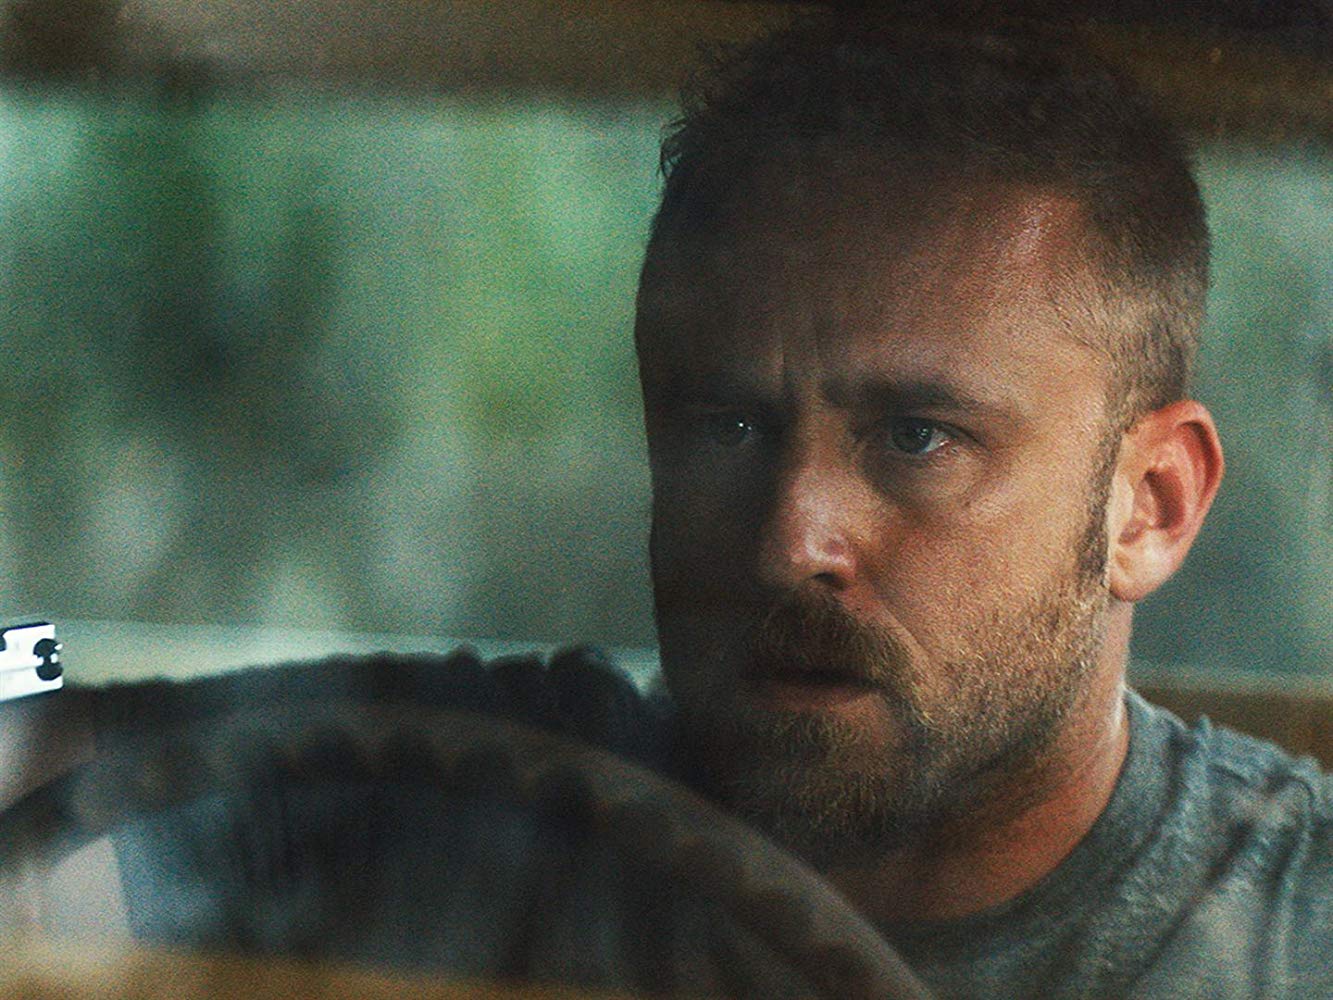 New on DVD and Blu-ray: GALVESTON Starring Ben Foster and Elle Fanning ...